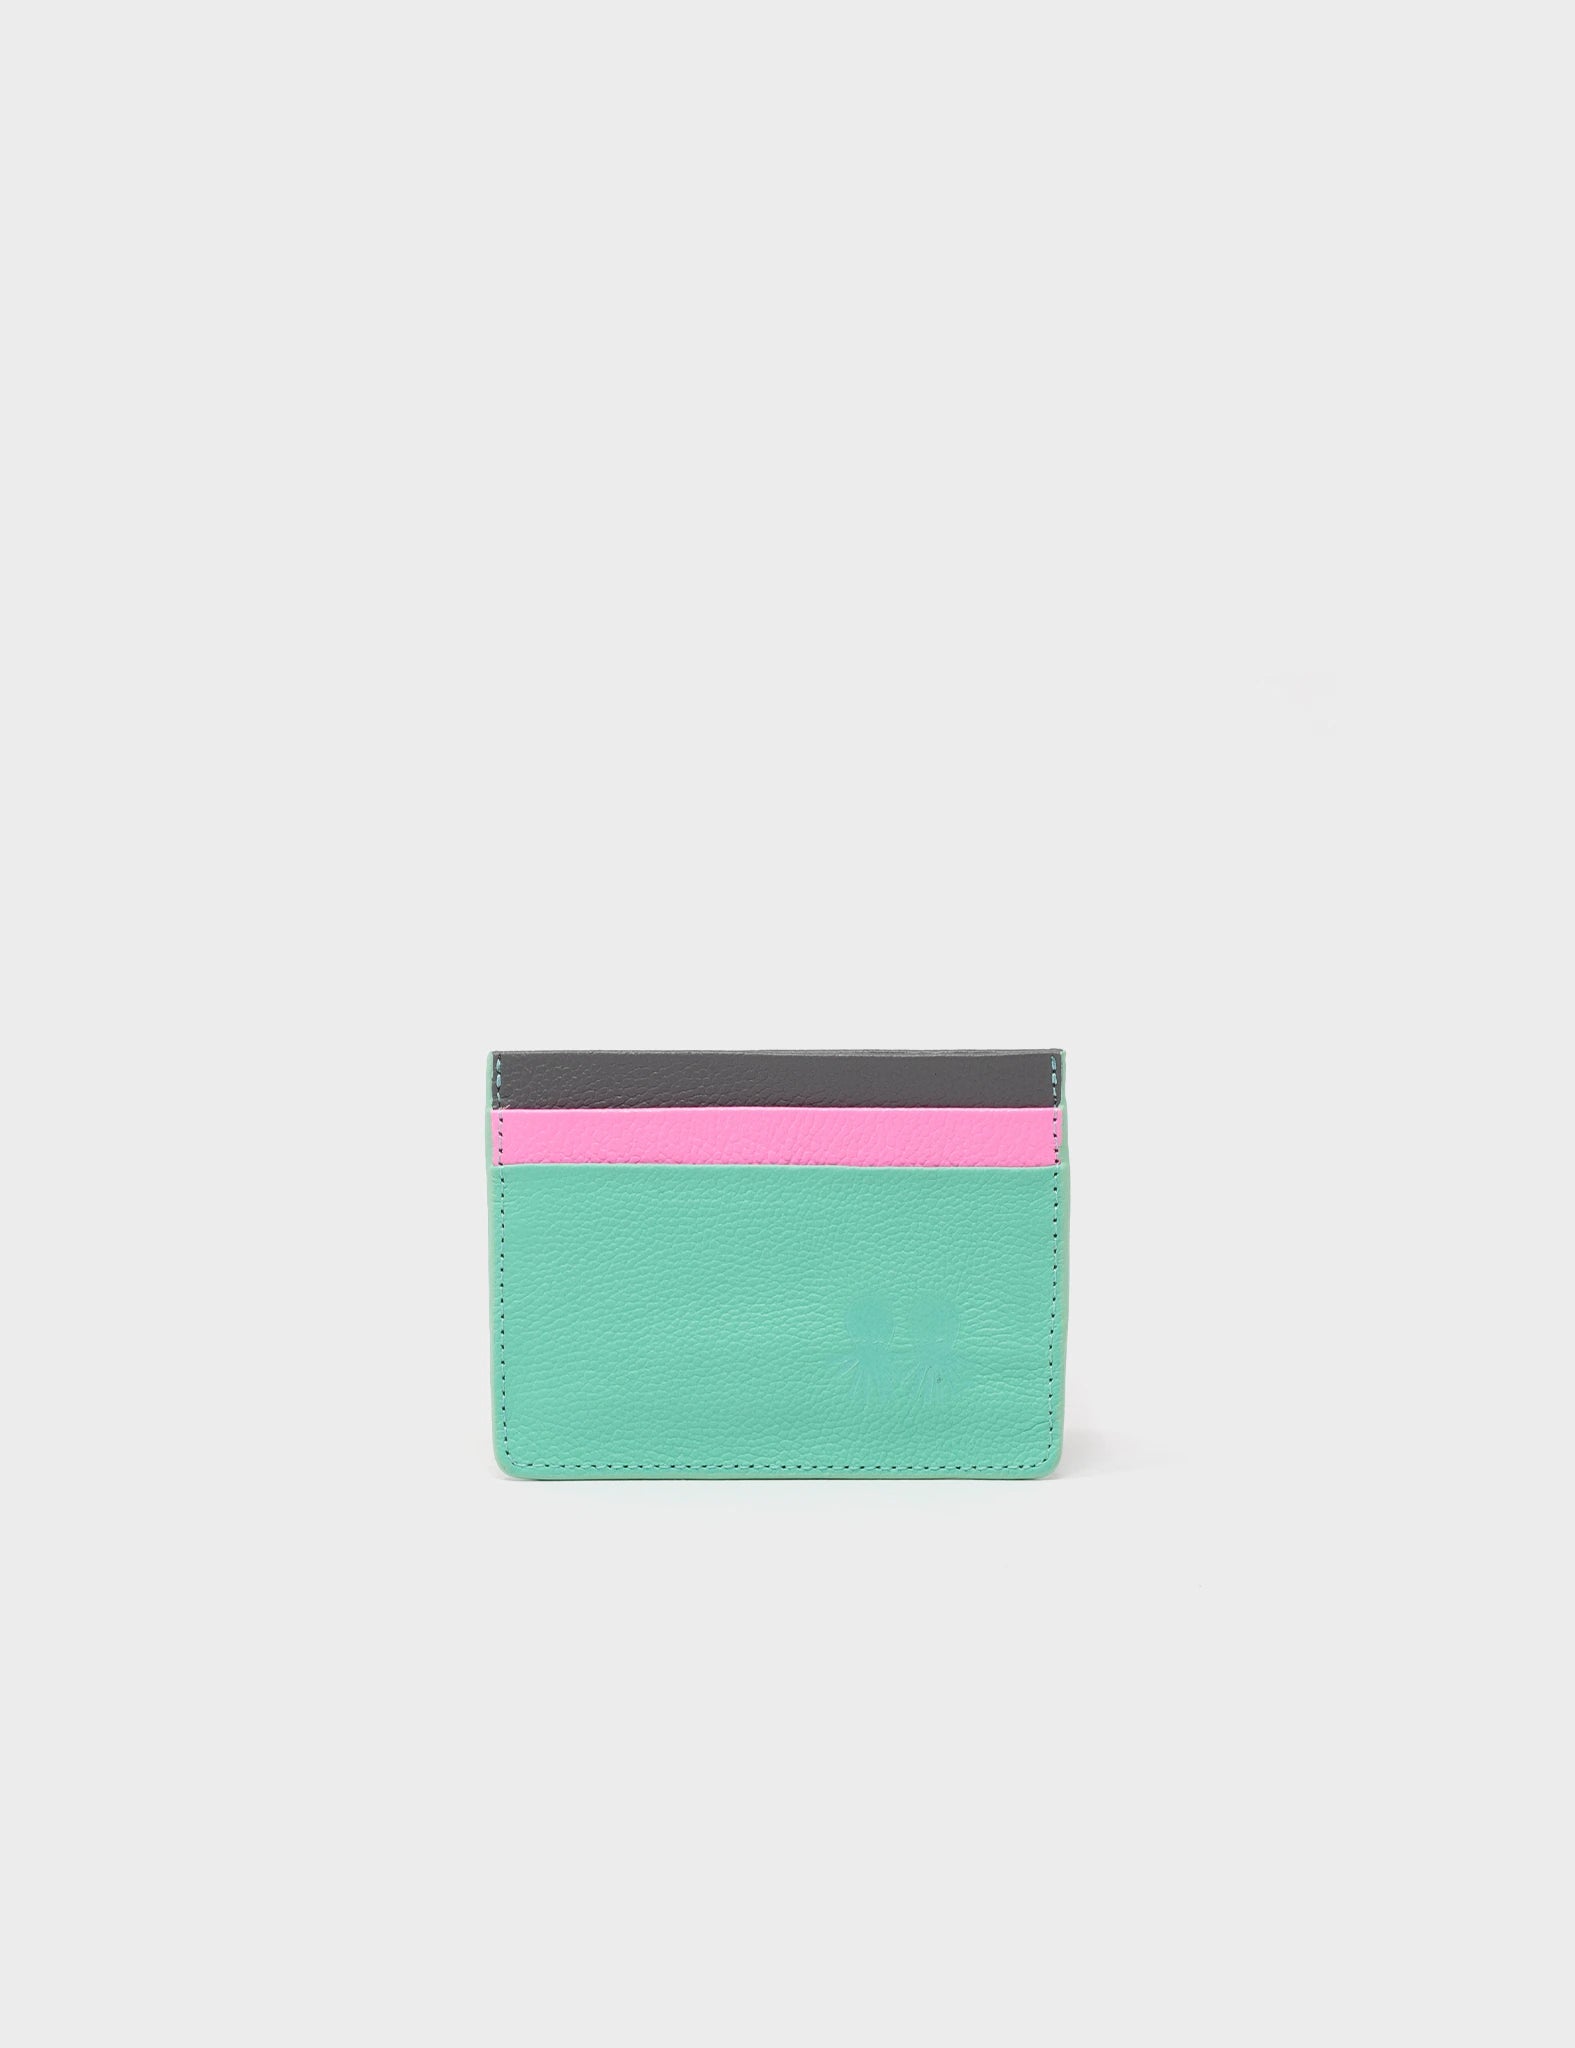 Filium Cardholder - Biscay green Print- Front view